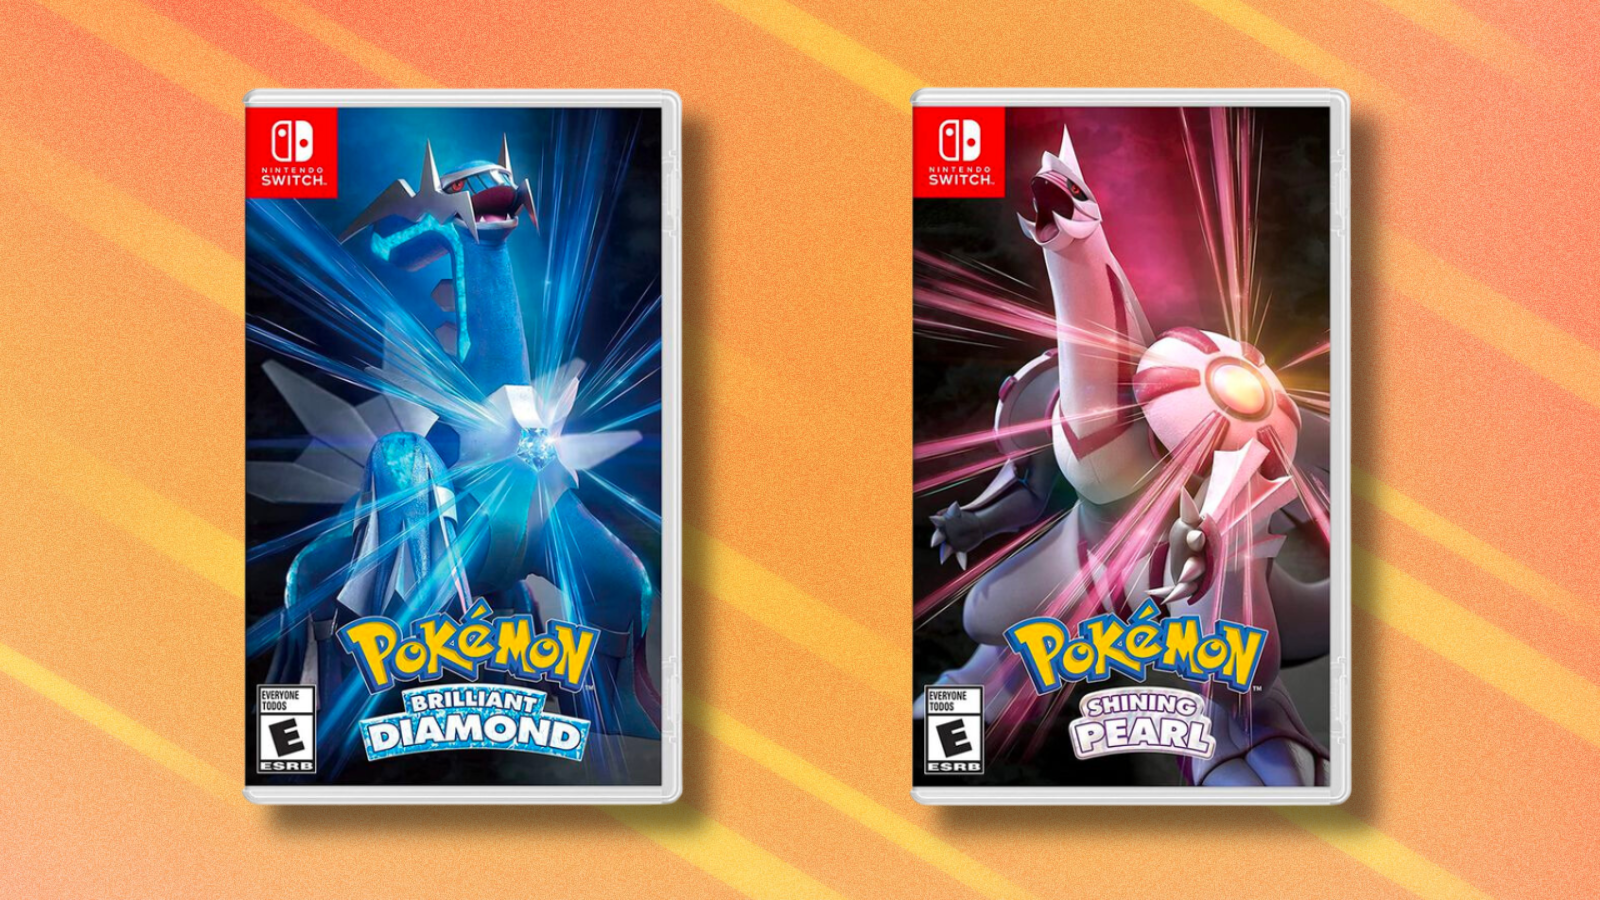 Pokémon Brilliant Diamond and Shining Pearl on abstract background